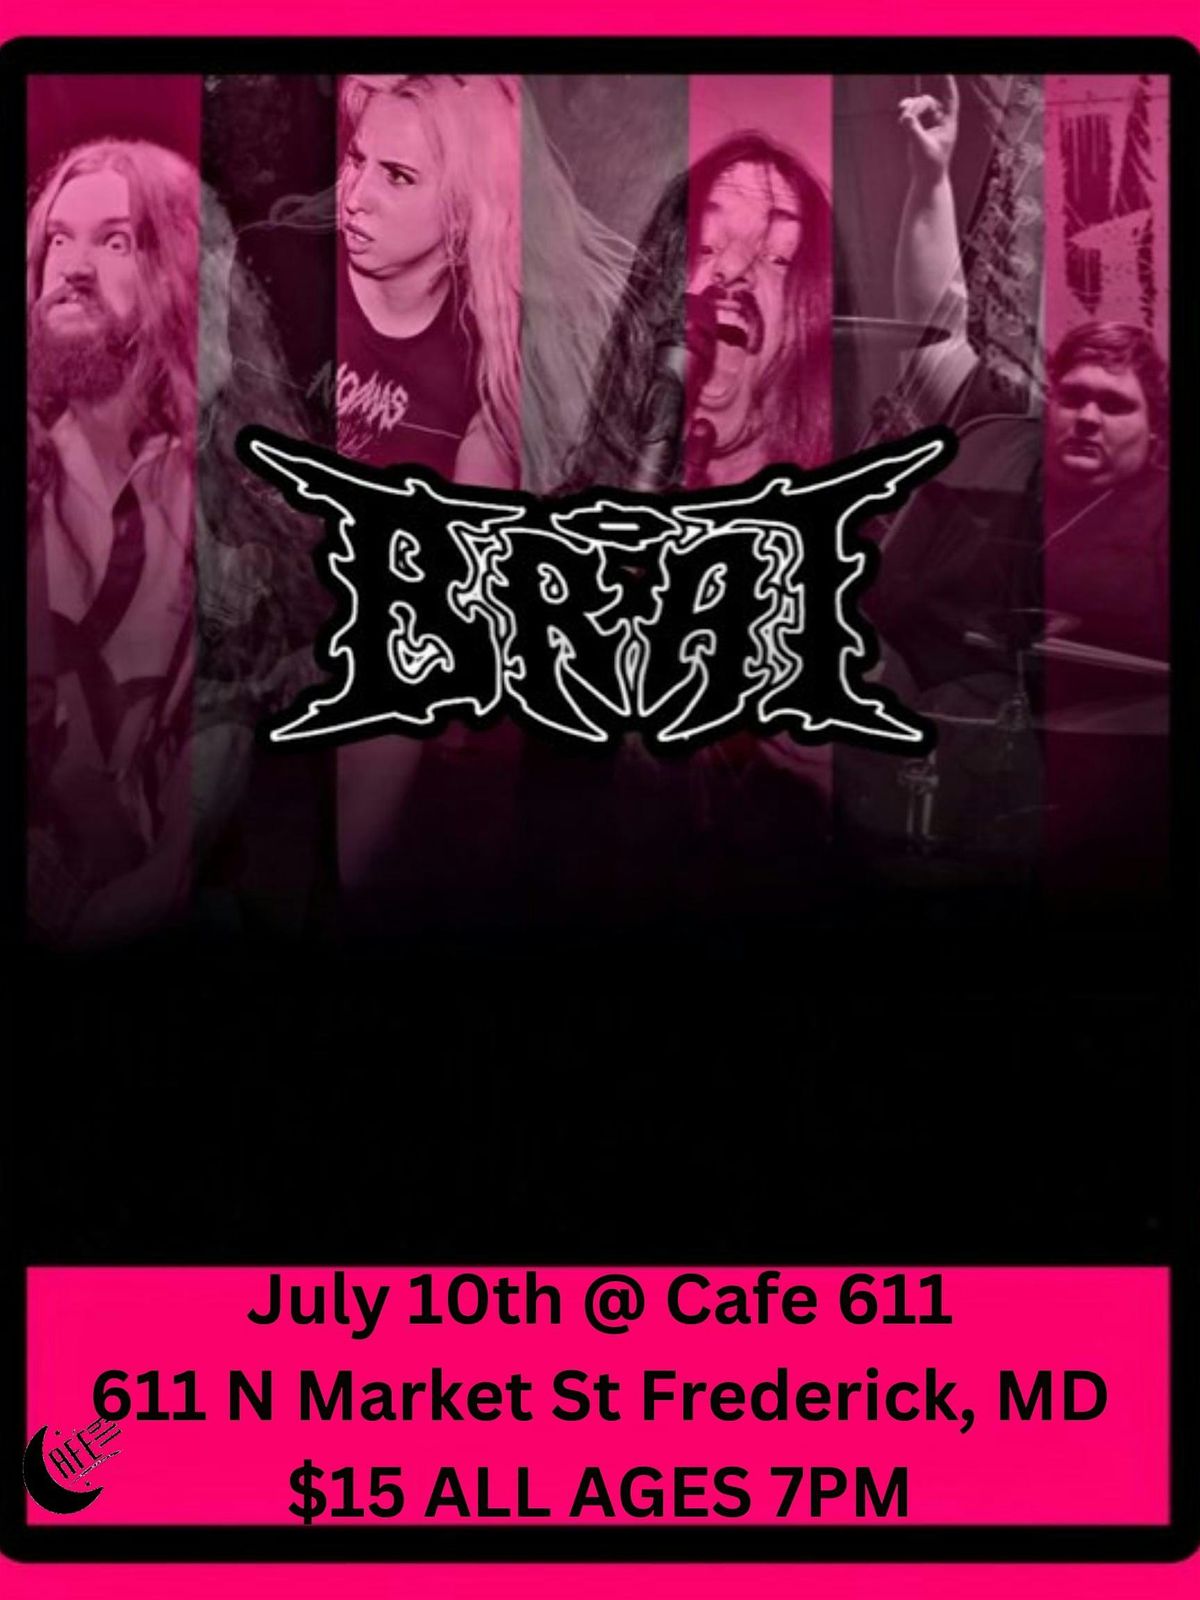 Brat\/Bedroom Floor\/Polluted Tongues\/Sorrows @ Cafe 611